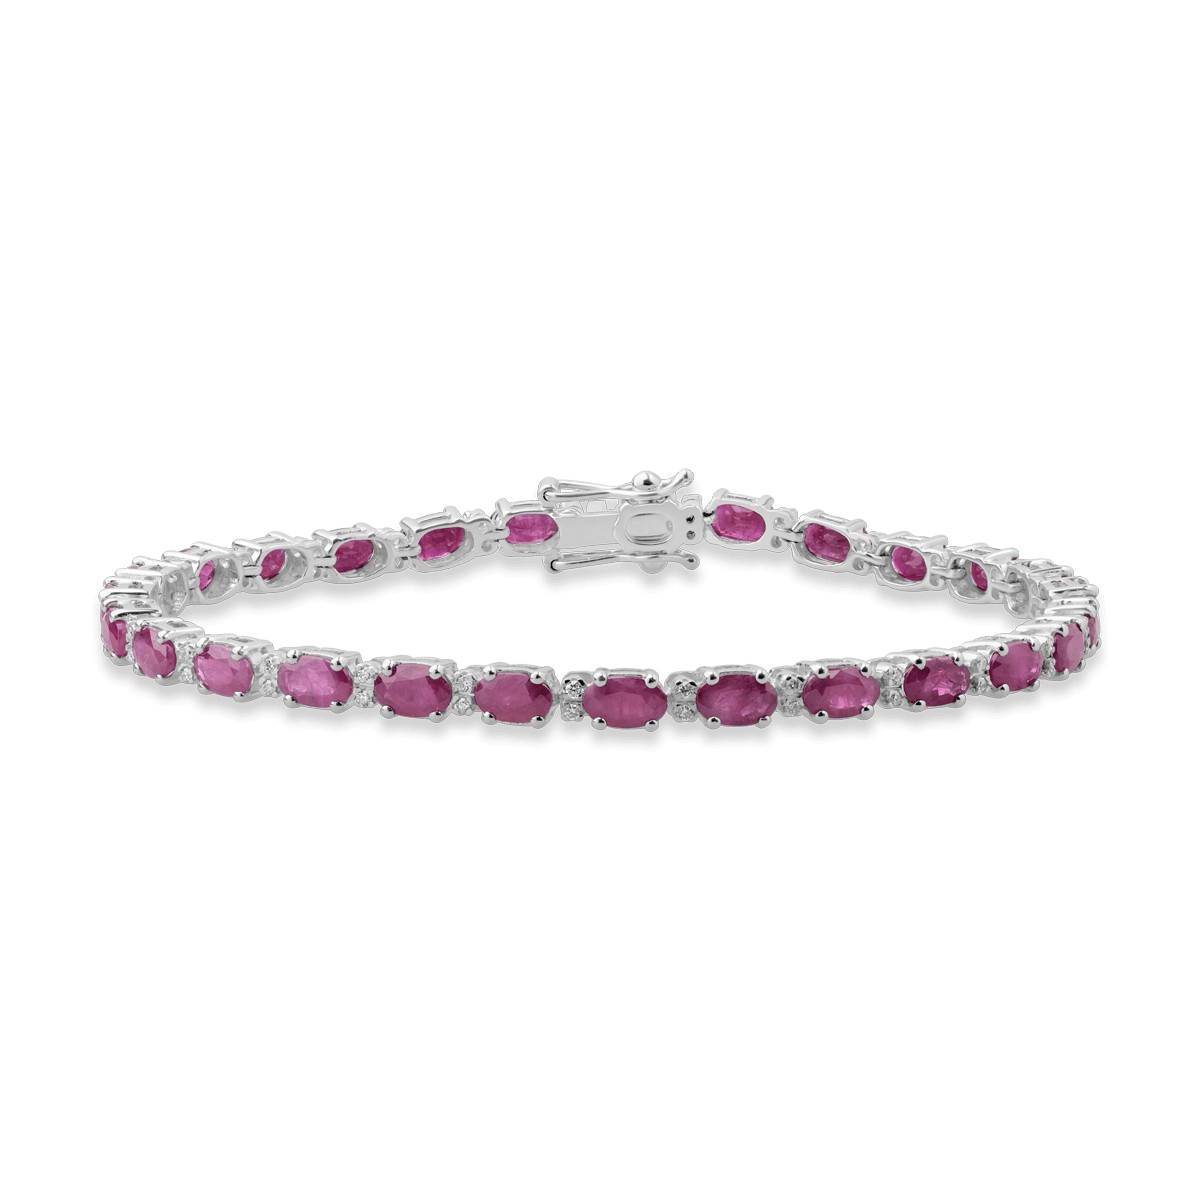 18K white gold tennis bracelet with 8.53ct rubies and 0.26ct diamonds